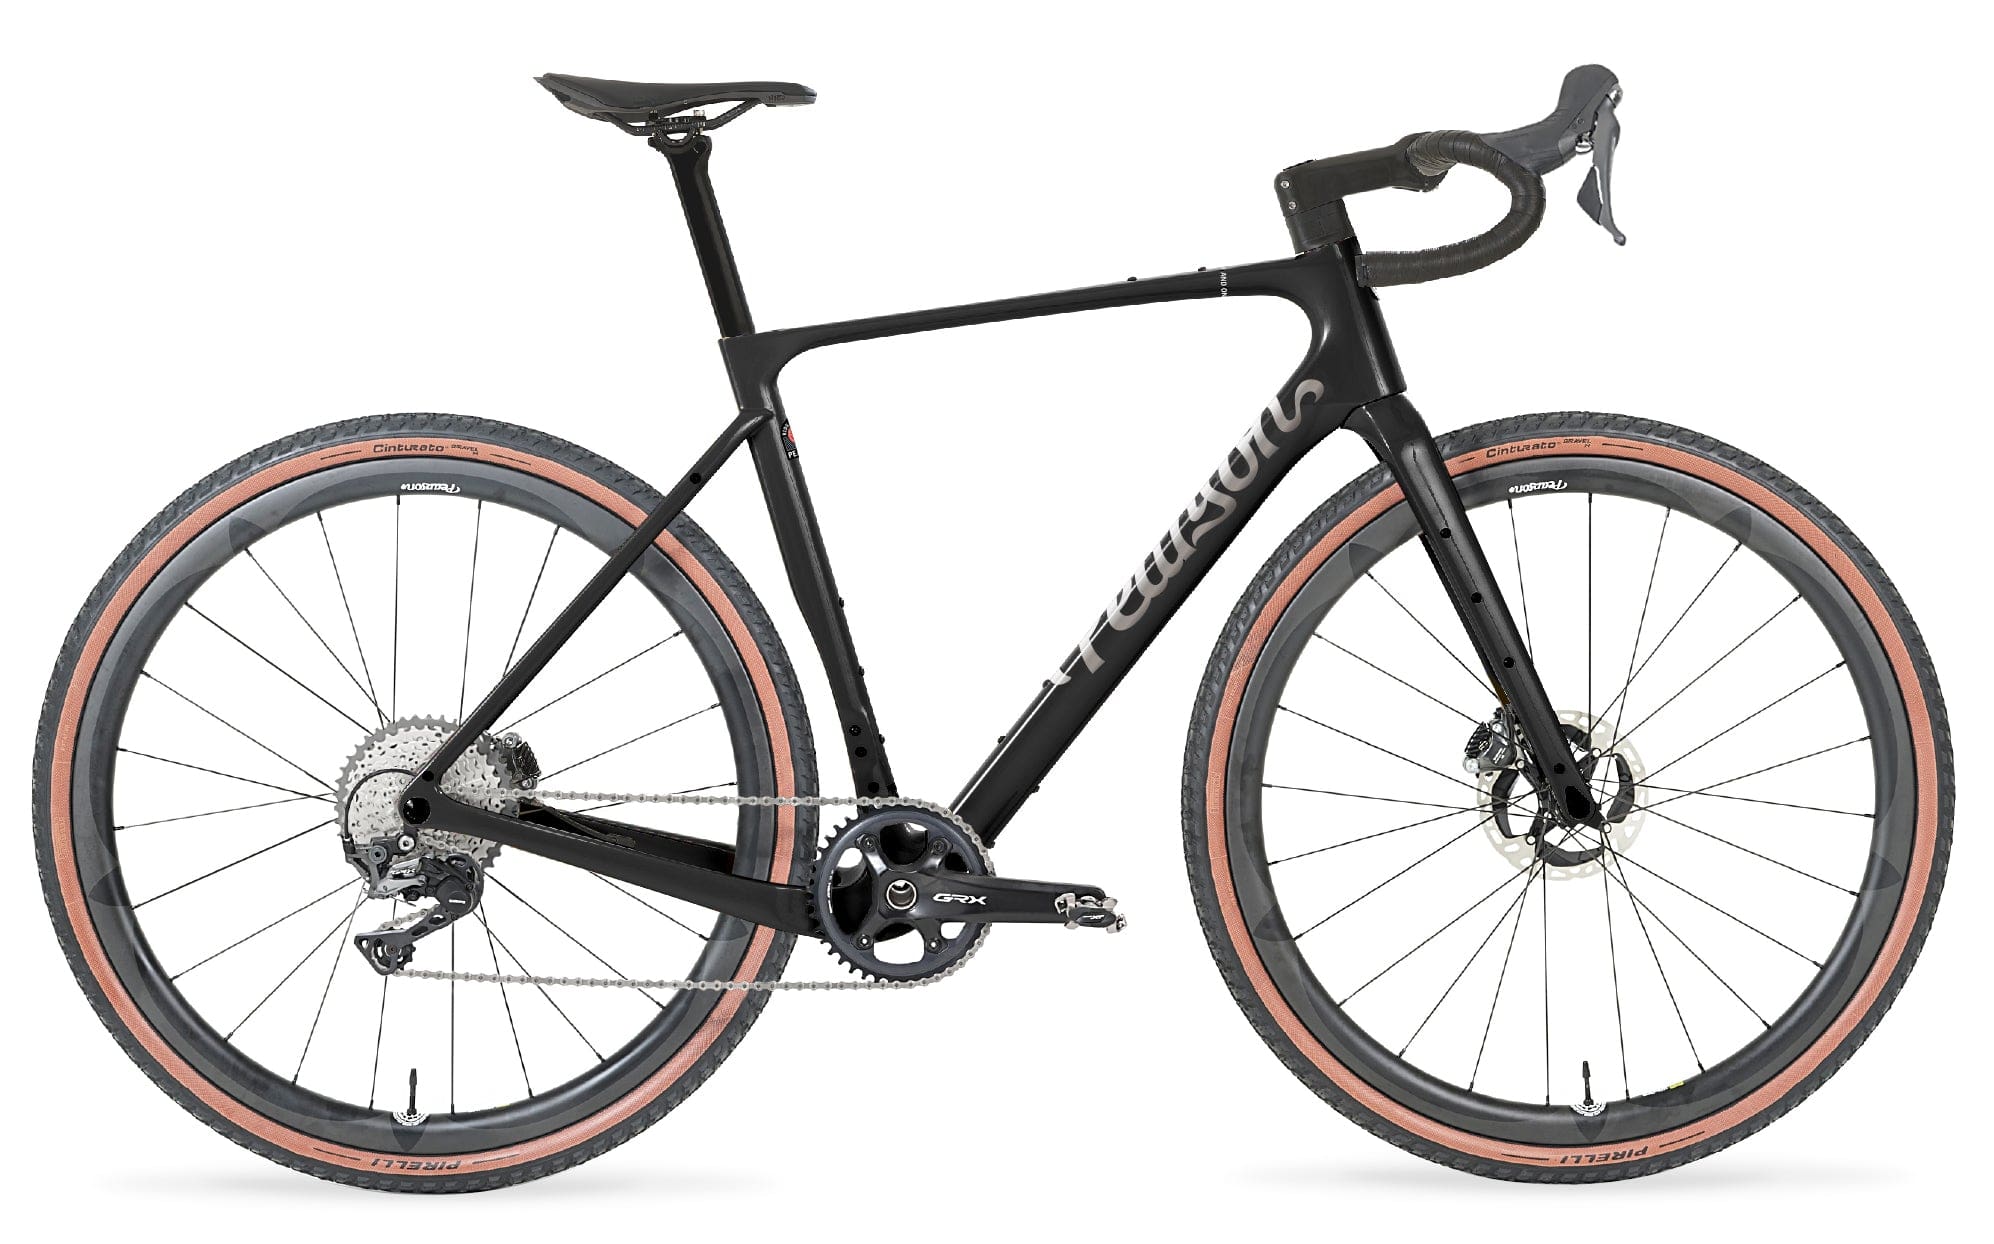 Pcs  On And On - Carbon Aero Gravel Bike  Black Star / X-large / Grx 800 Mechanical - Hoopdriver Bump And Grind Carbon Wheels